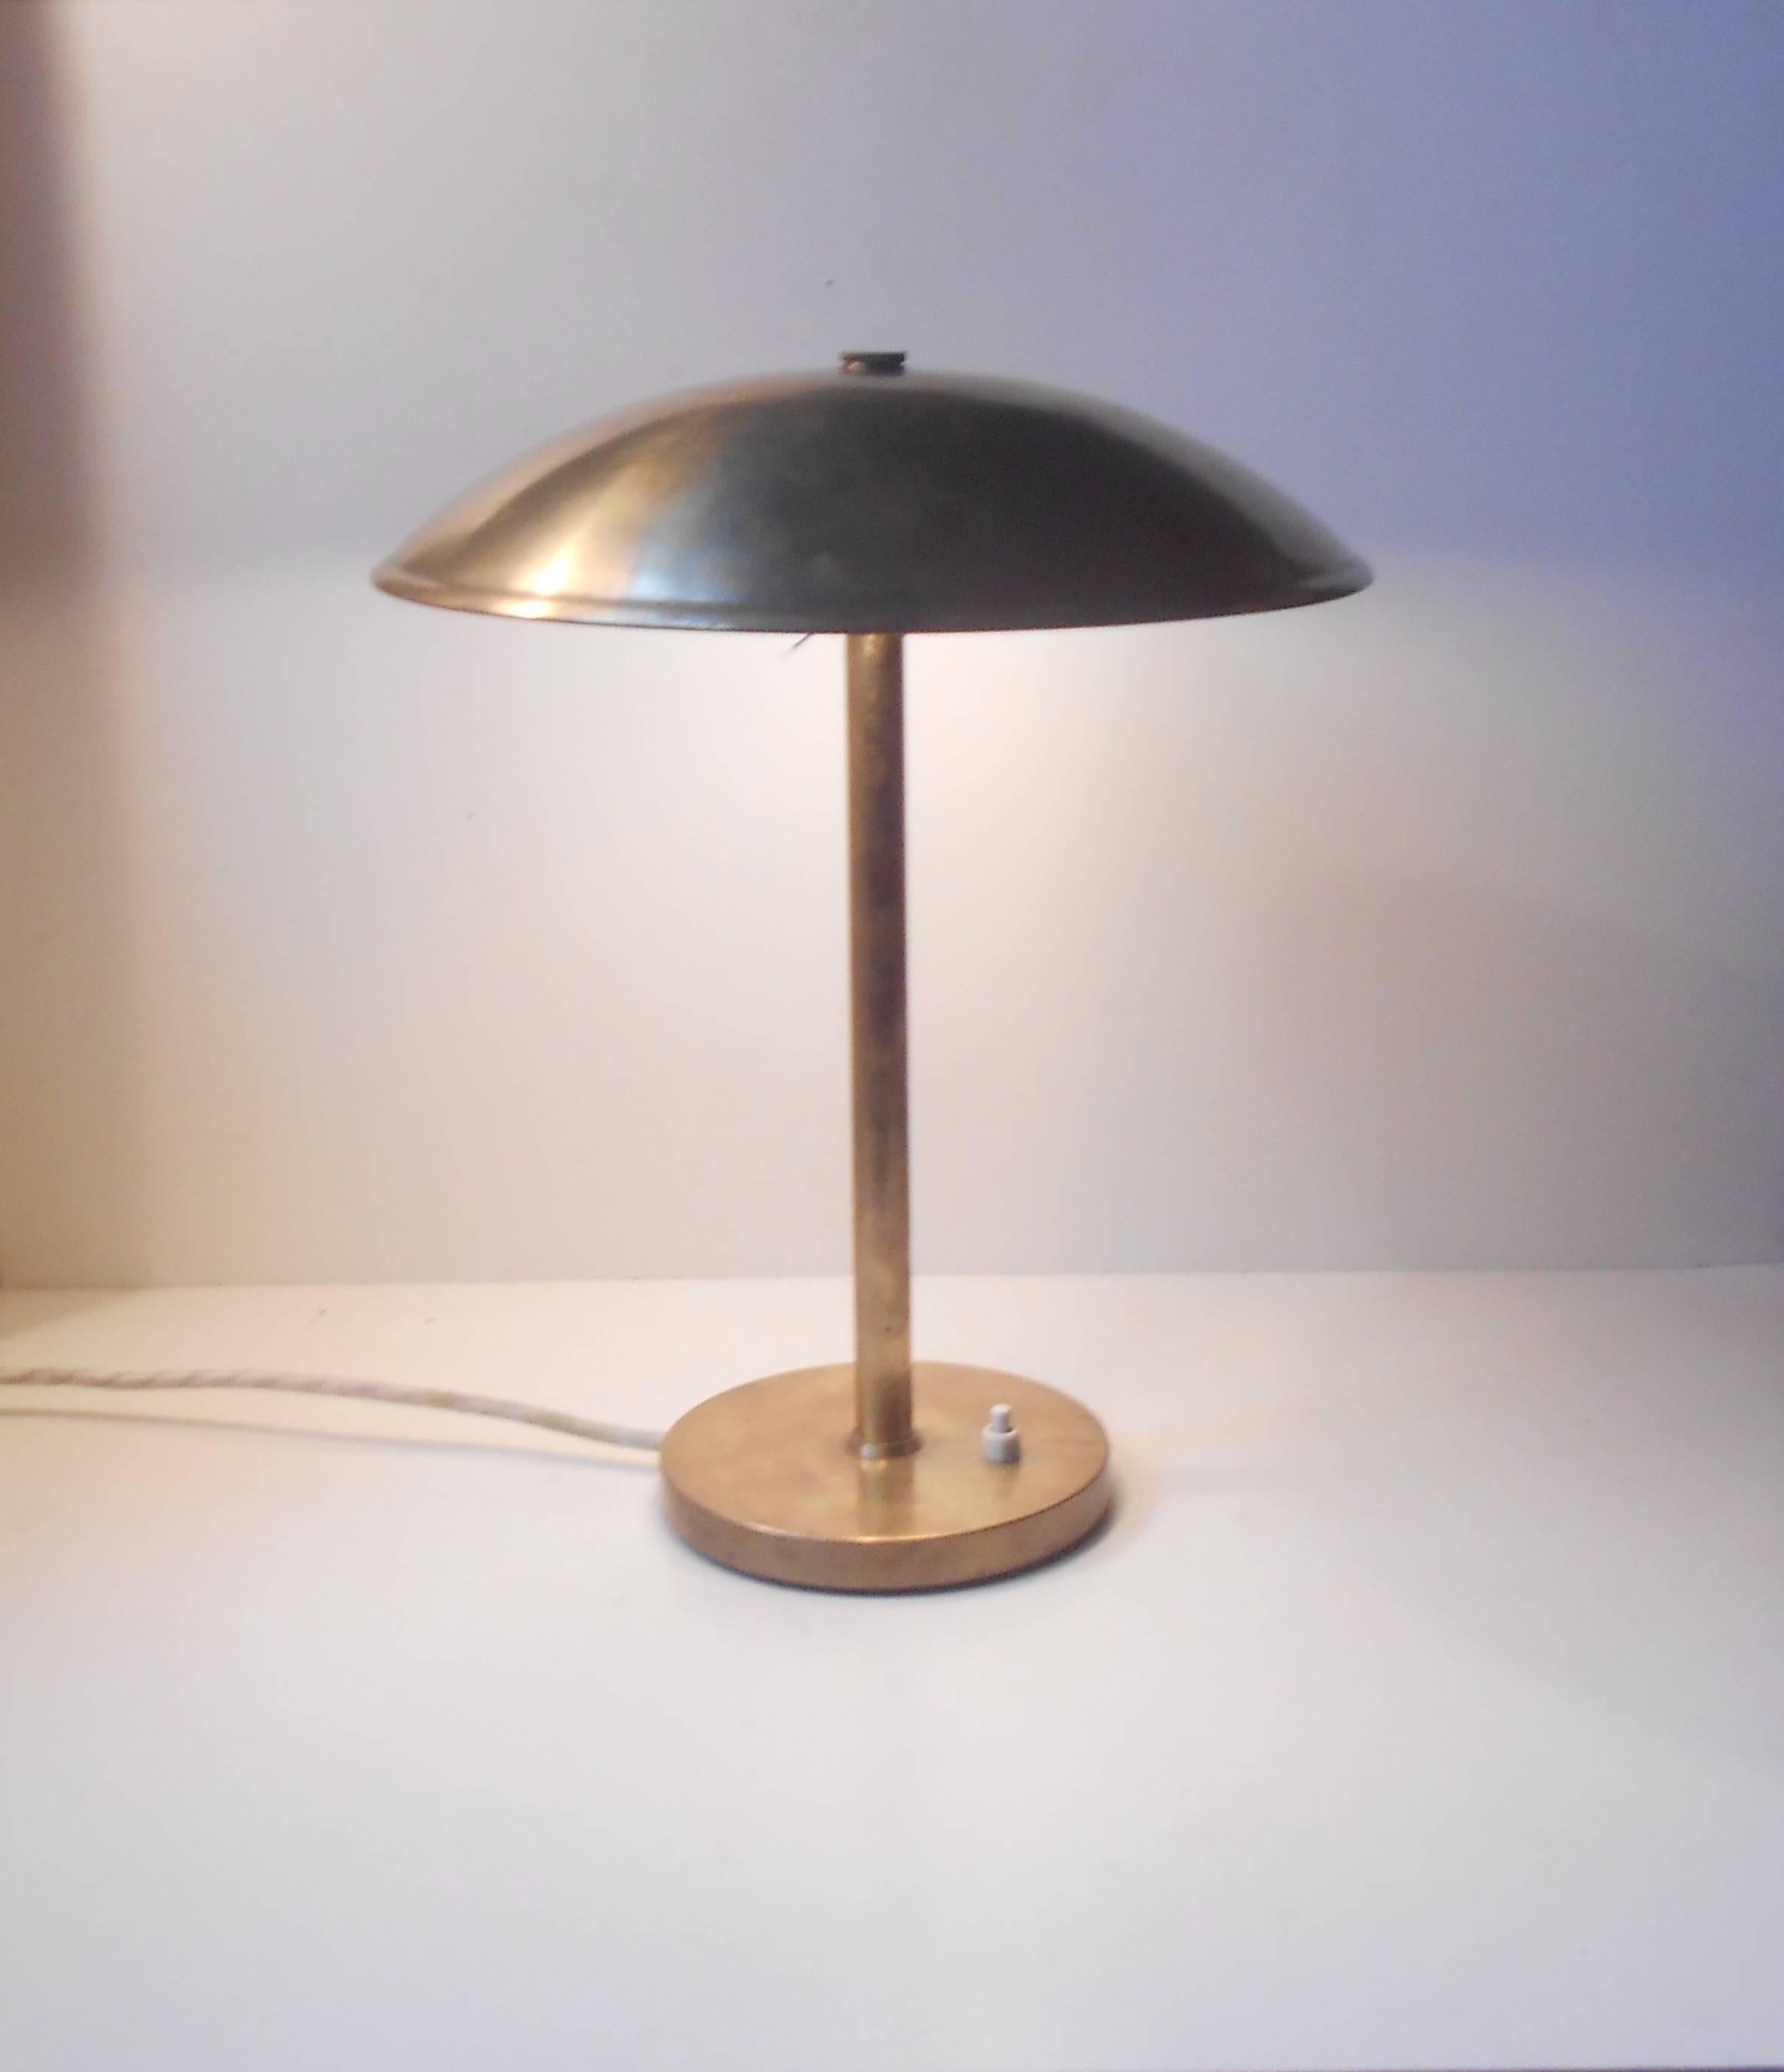 Some believe this table lamp was designed by Christian Dell and is often referred to as the 